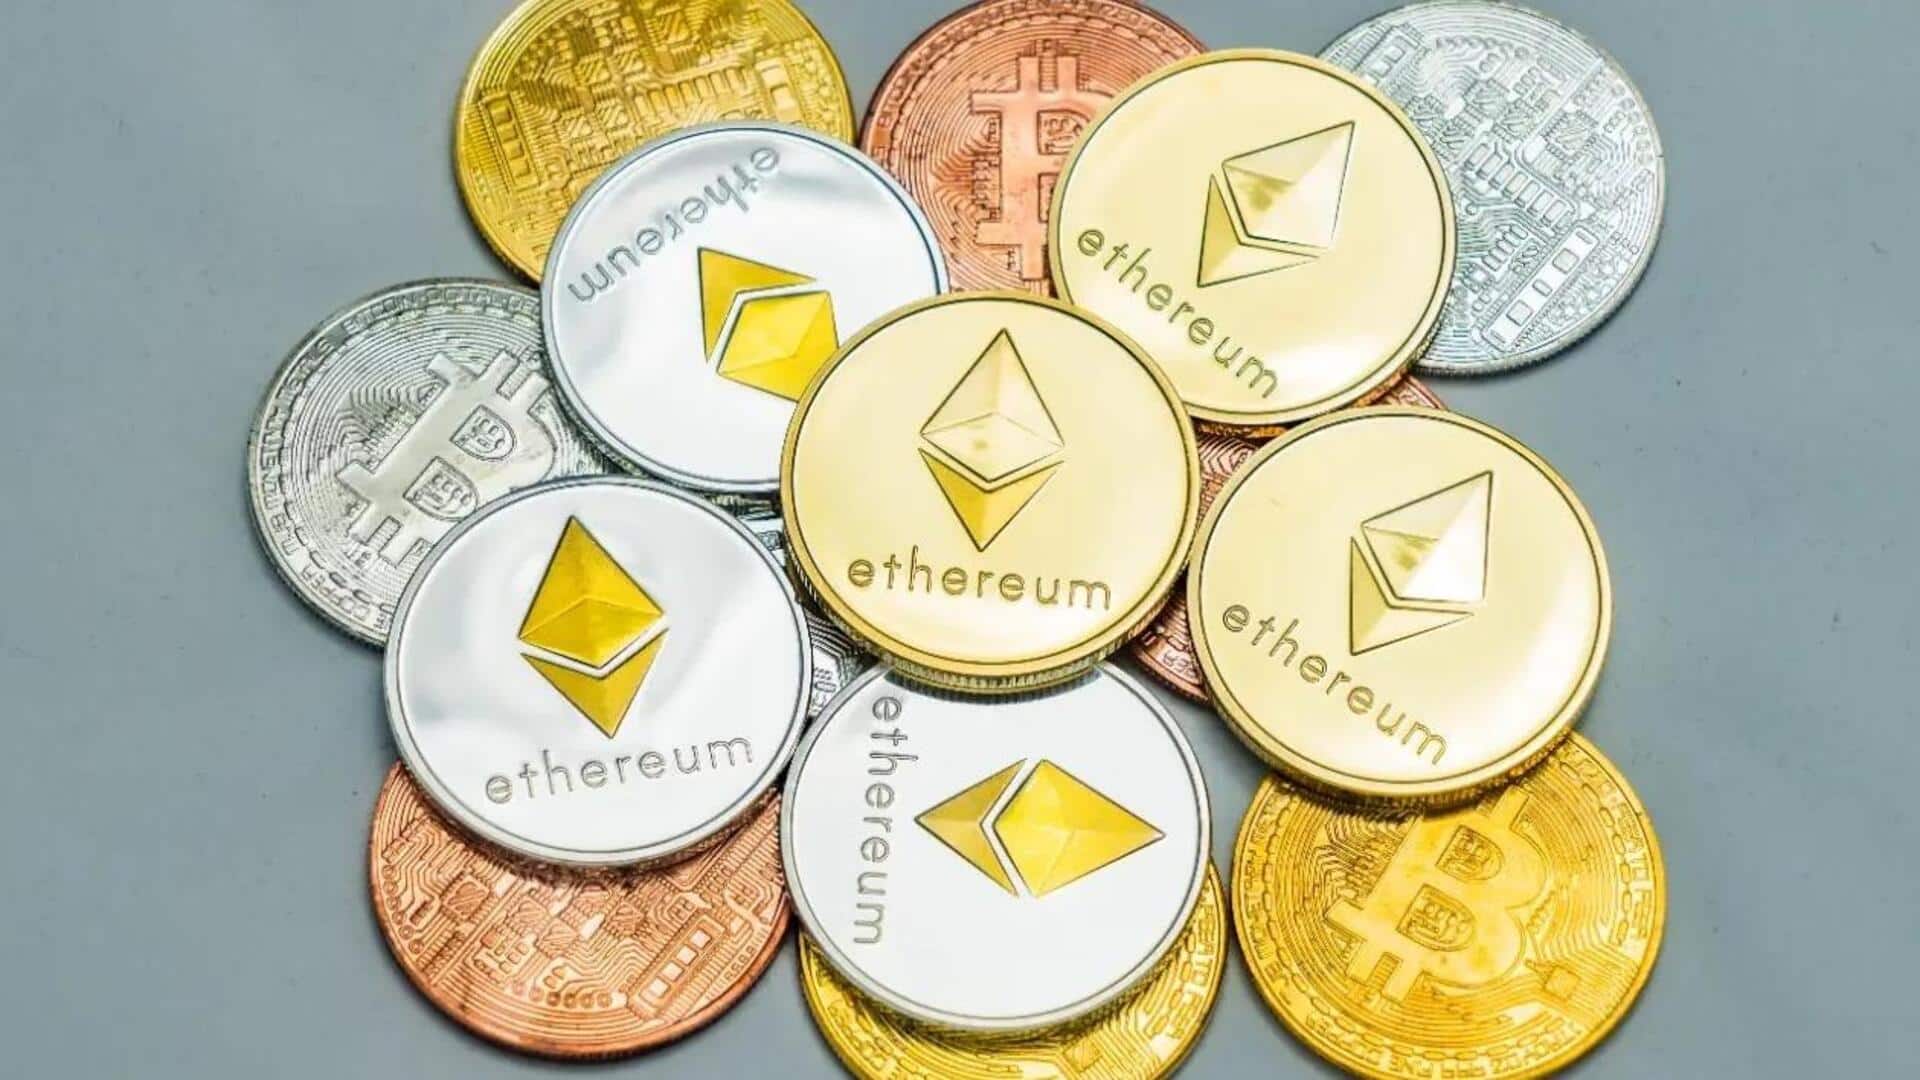 Cryptocurrency prices: Here are rates of Bitcoin, Ethereum, BNB, XRP